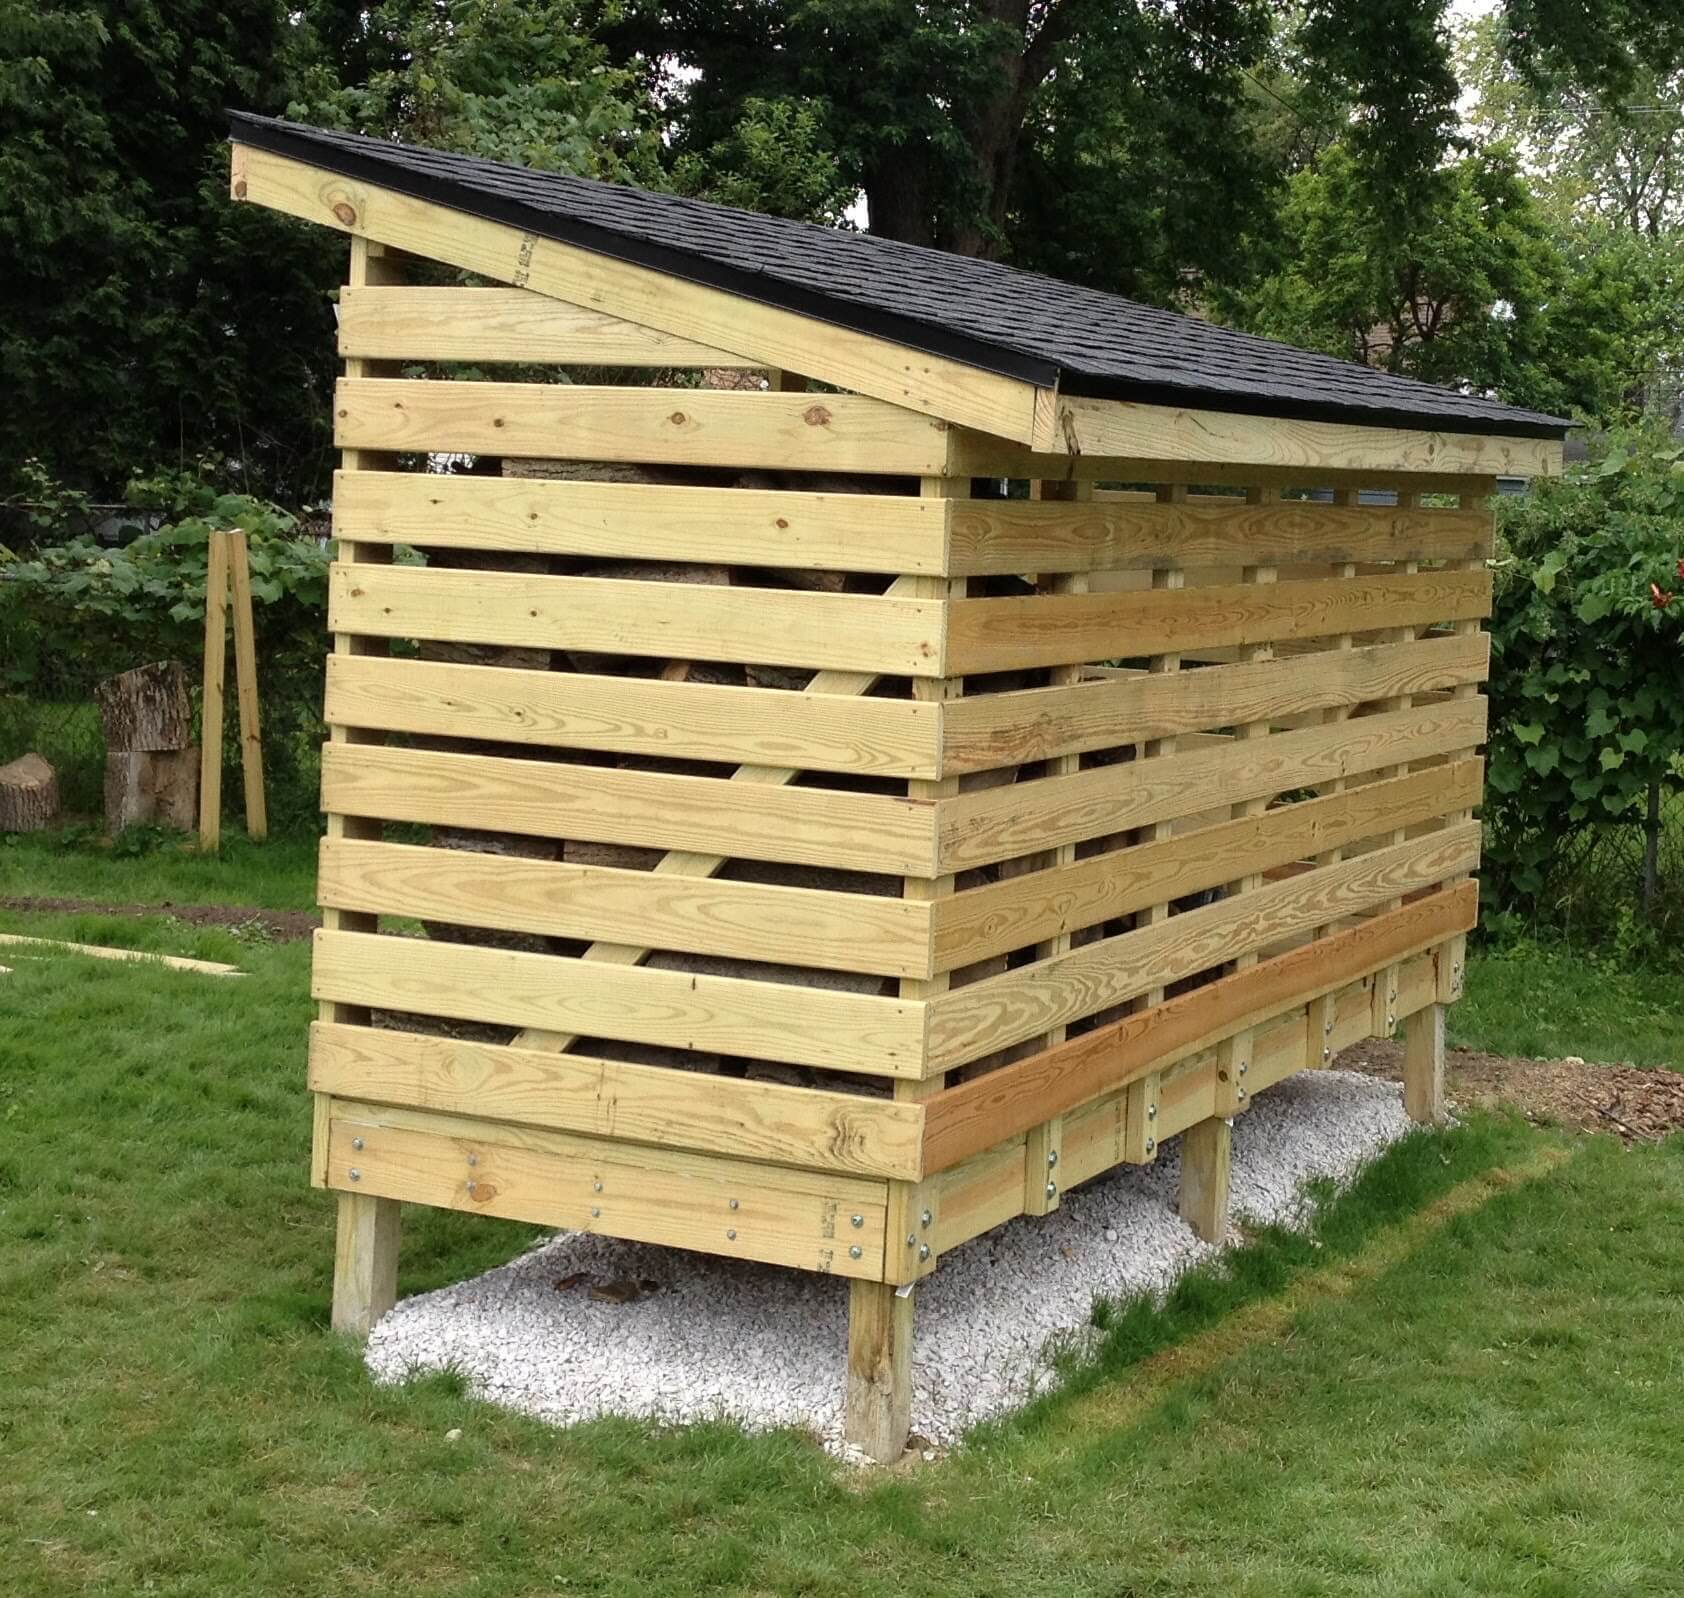 A Firewood Rack Protected from the Rain